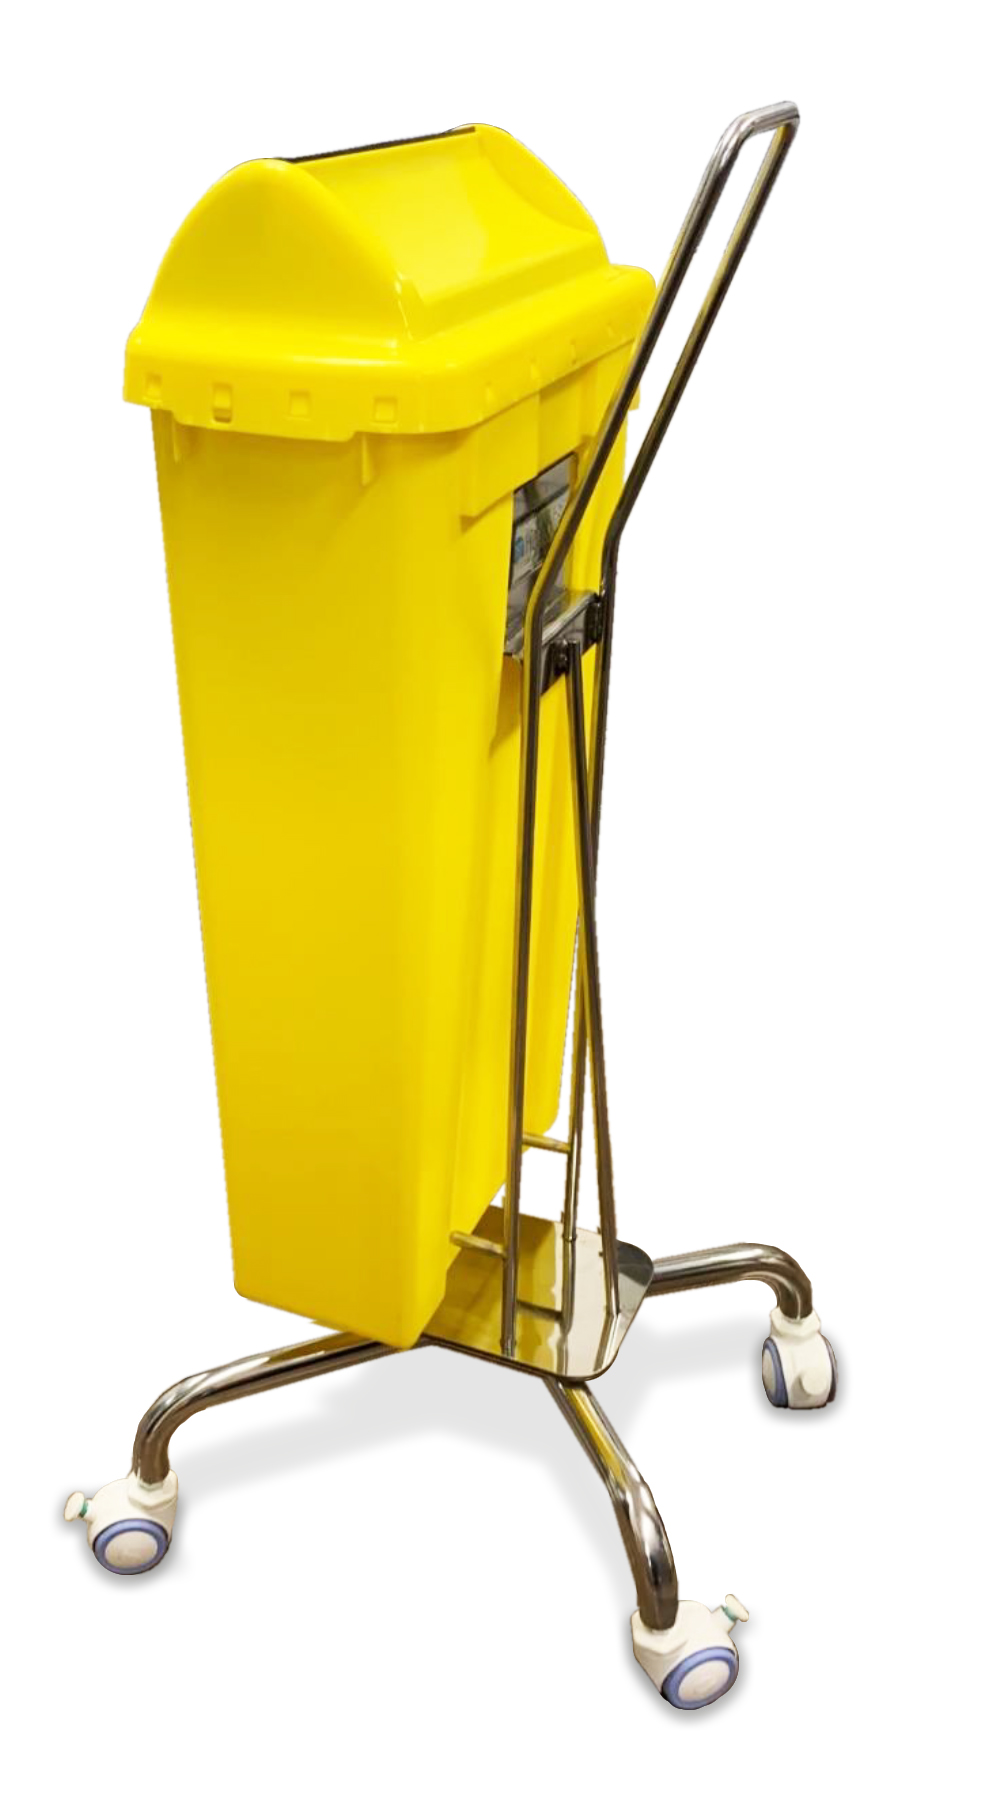 FITTANK Sharps Container Bin Trolley for EasyCollect Range